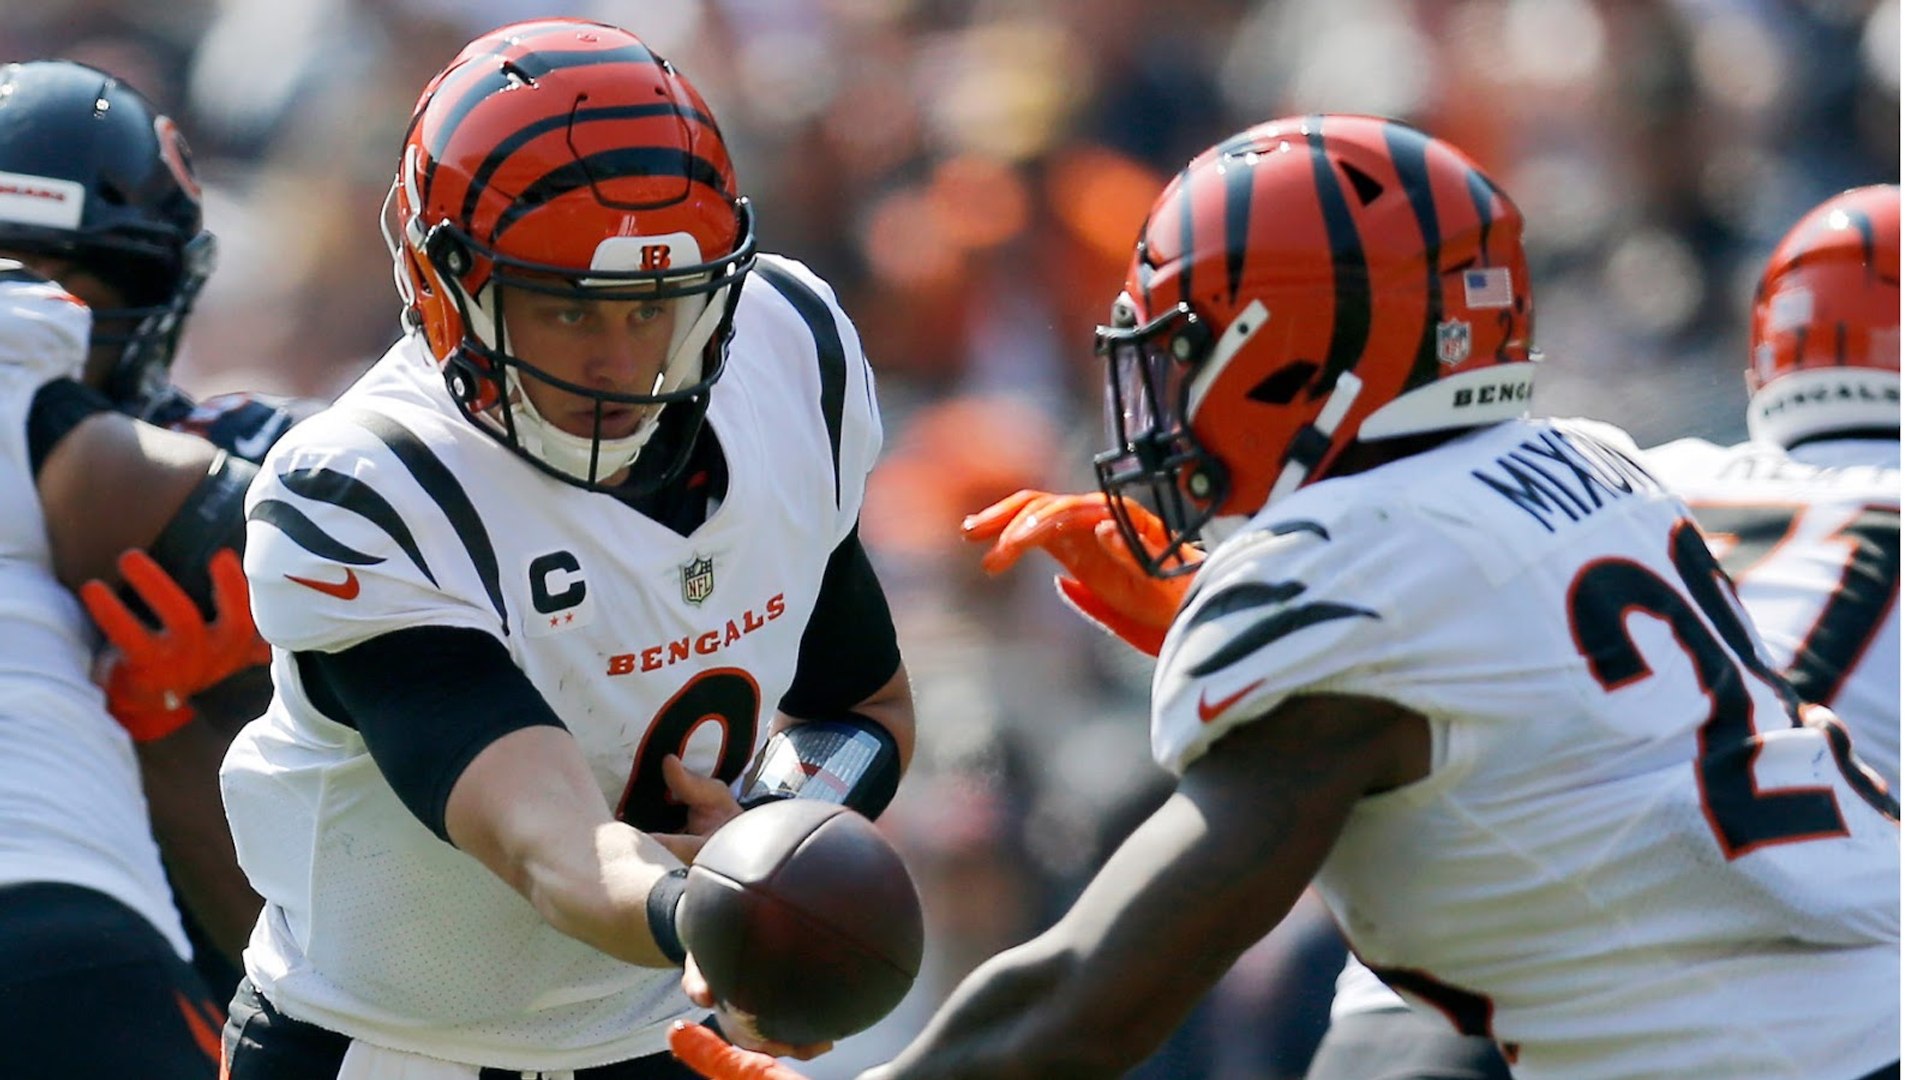 Bengals vs. Titans Preview: Betting Odds & Game Analysis - video